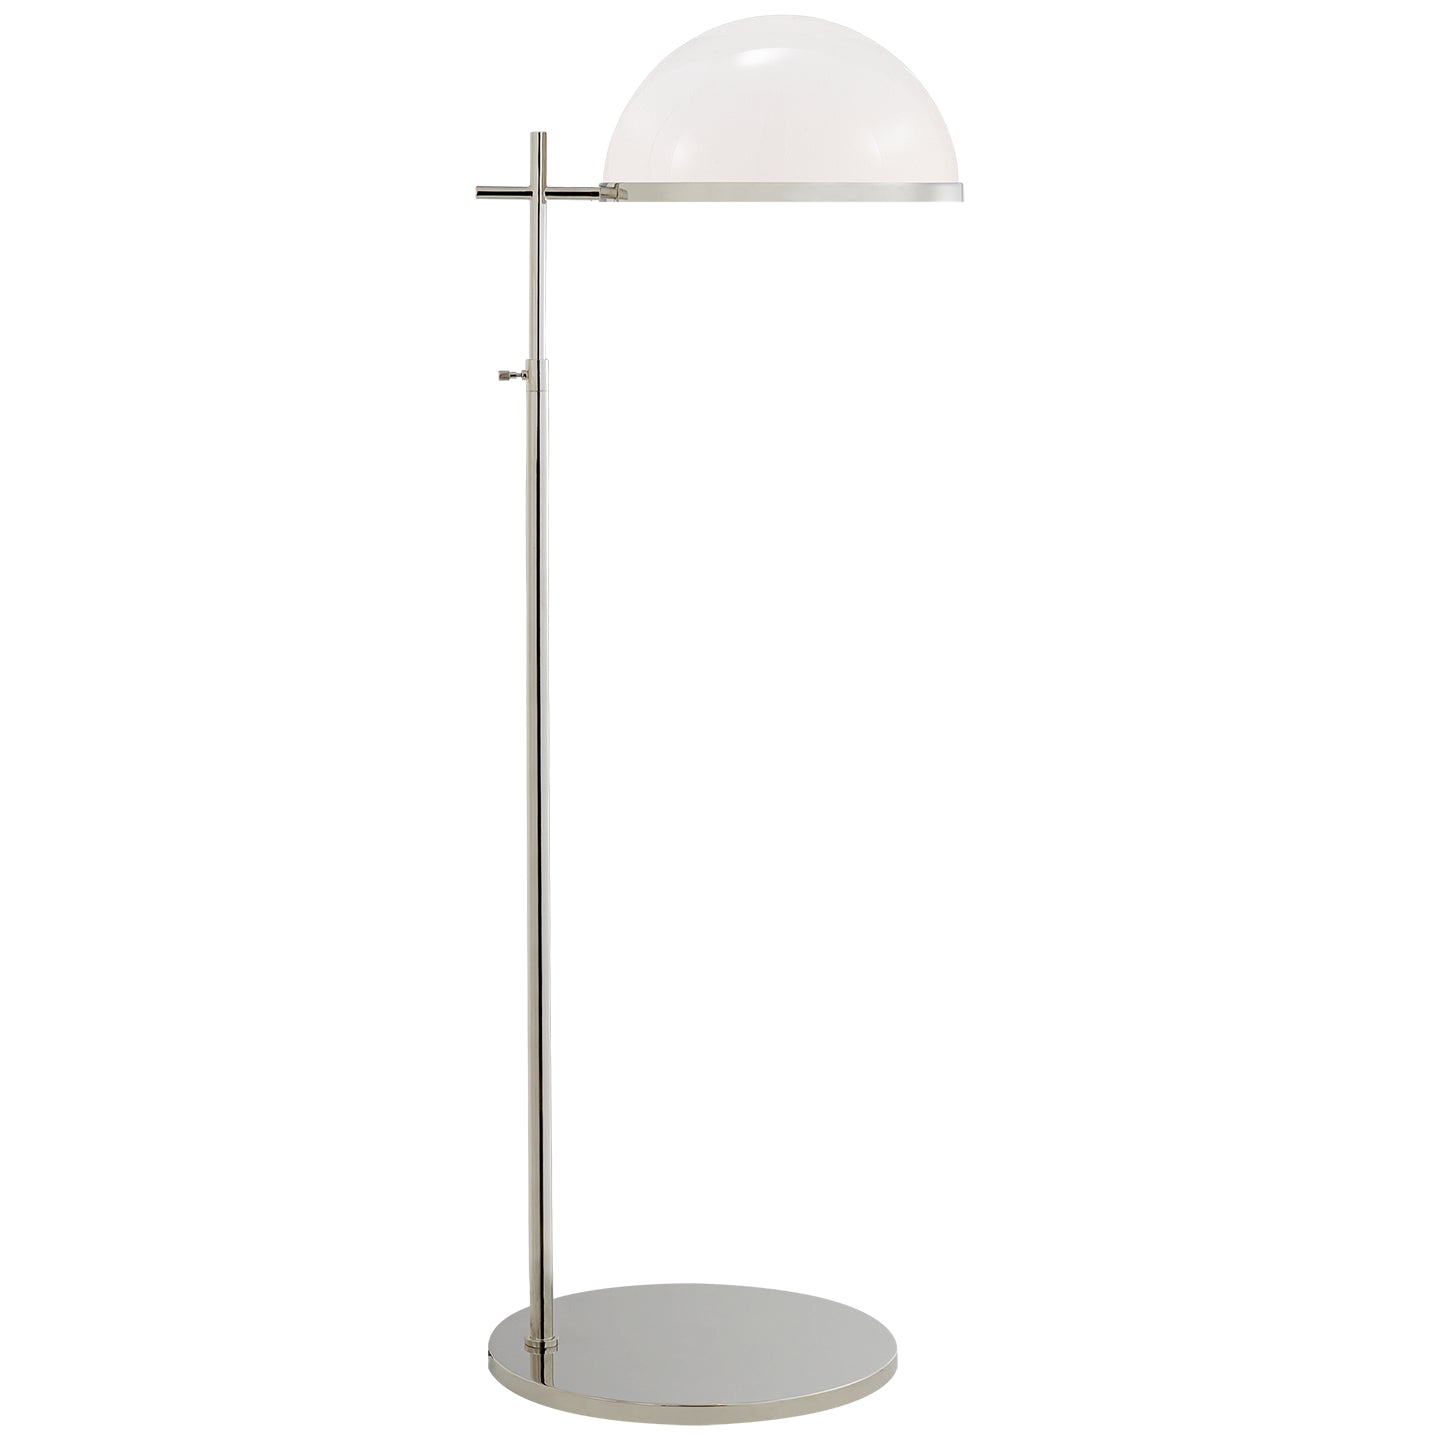 Load image into Gallery viewer, Visual Comfort Signature - KW 1240PN-WG - One Light Floor Lamp - Dulcet - Polished Nickel
